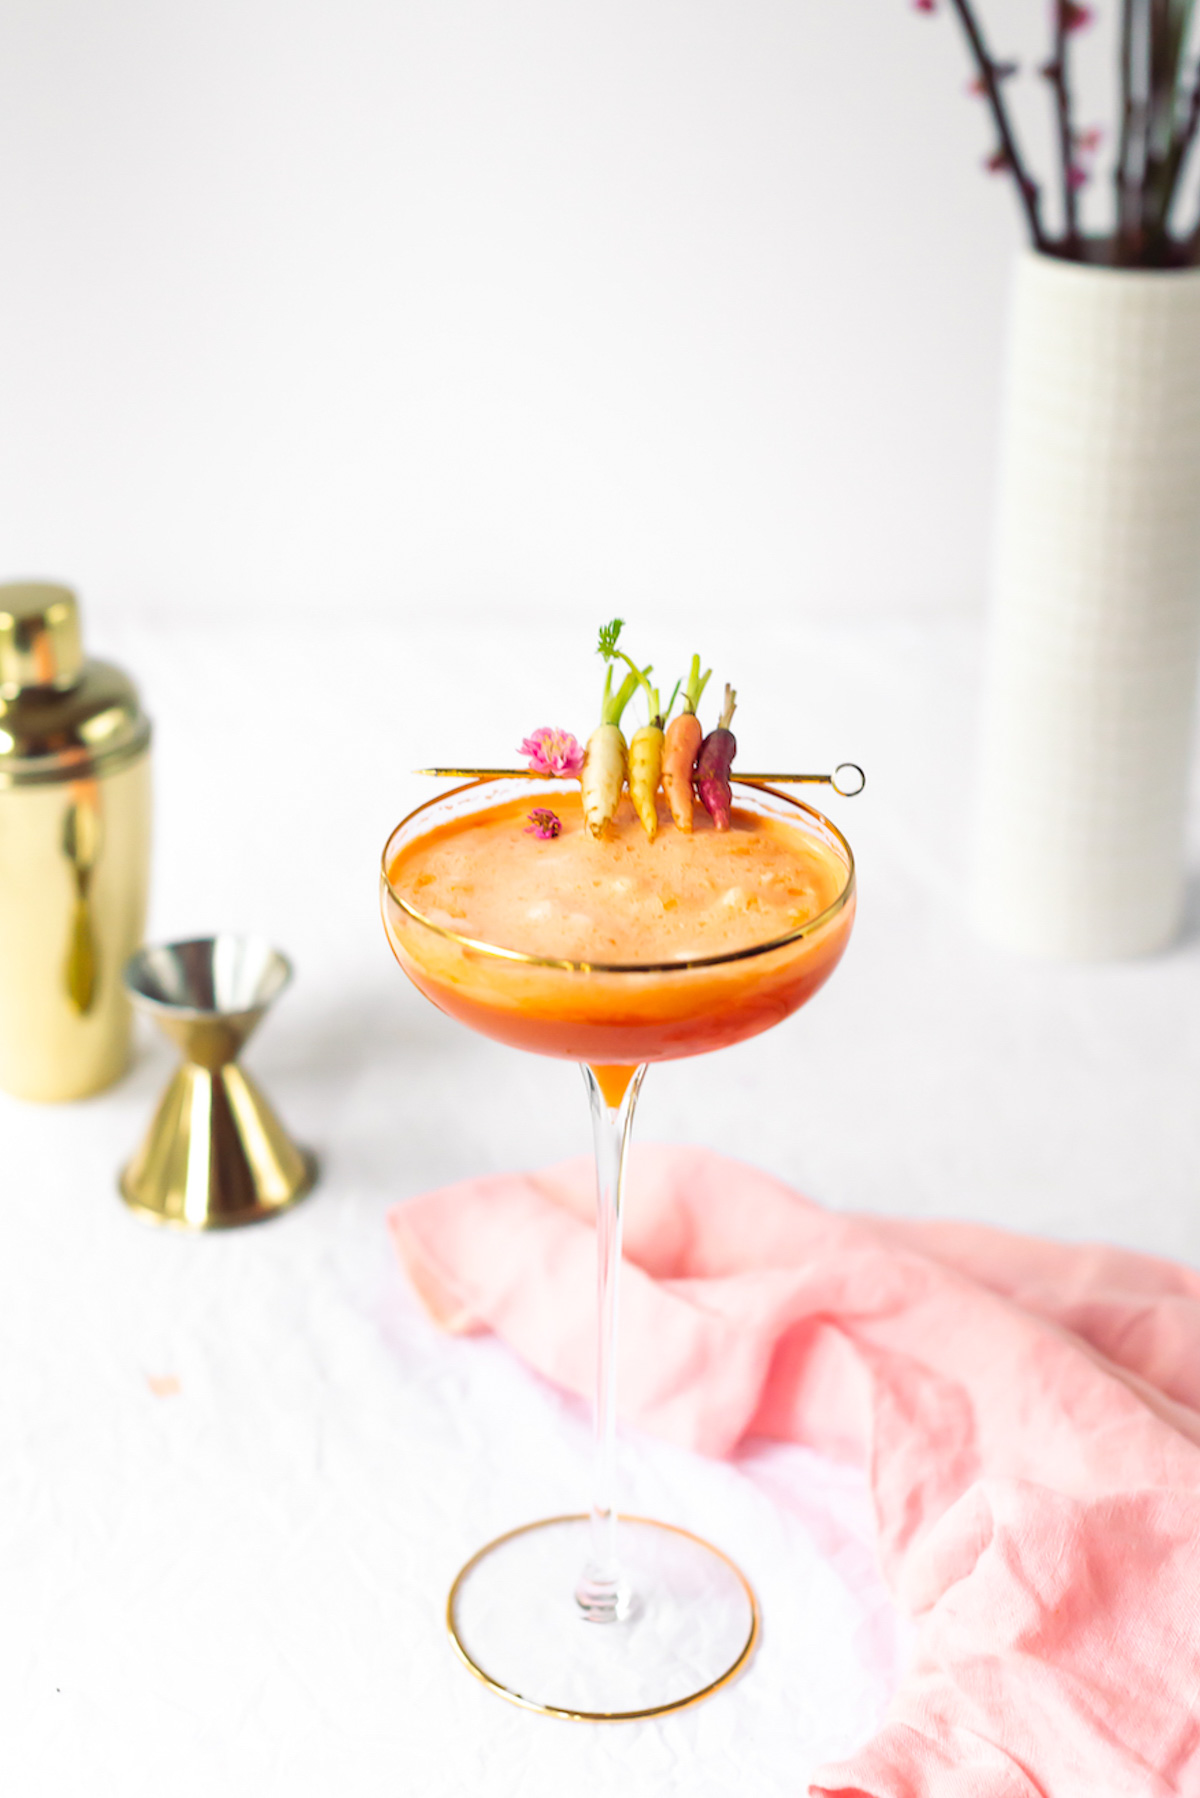 Carrot cocktail recipe from Sugar & Cloth